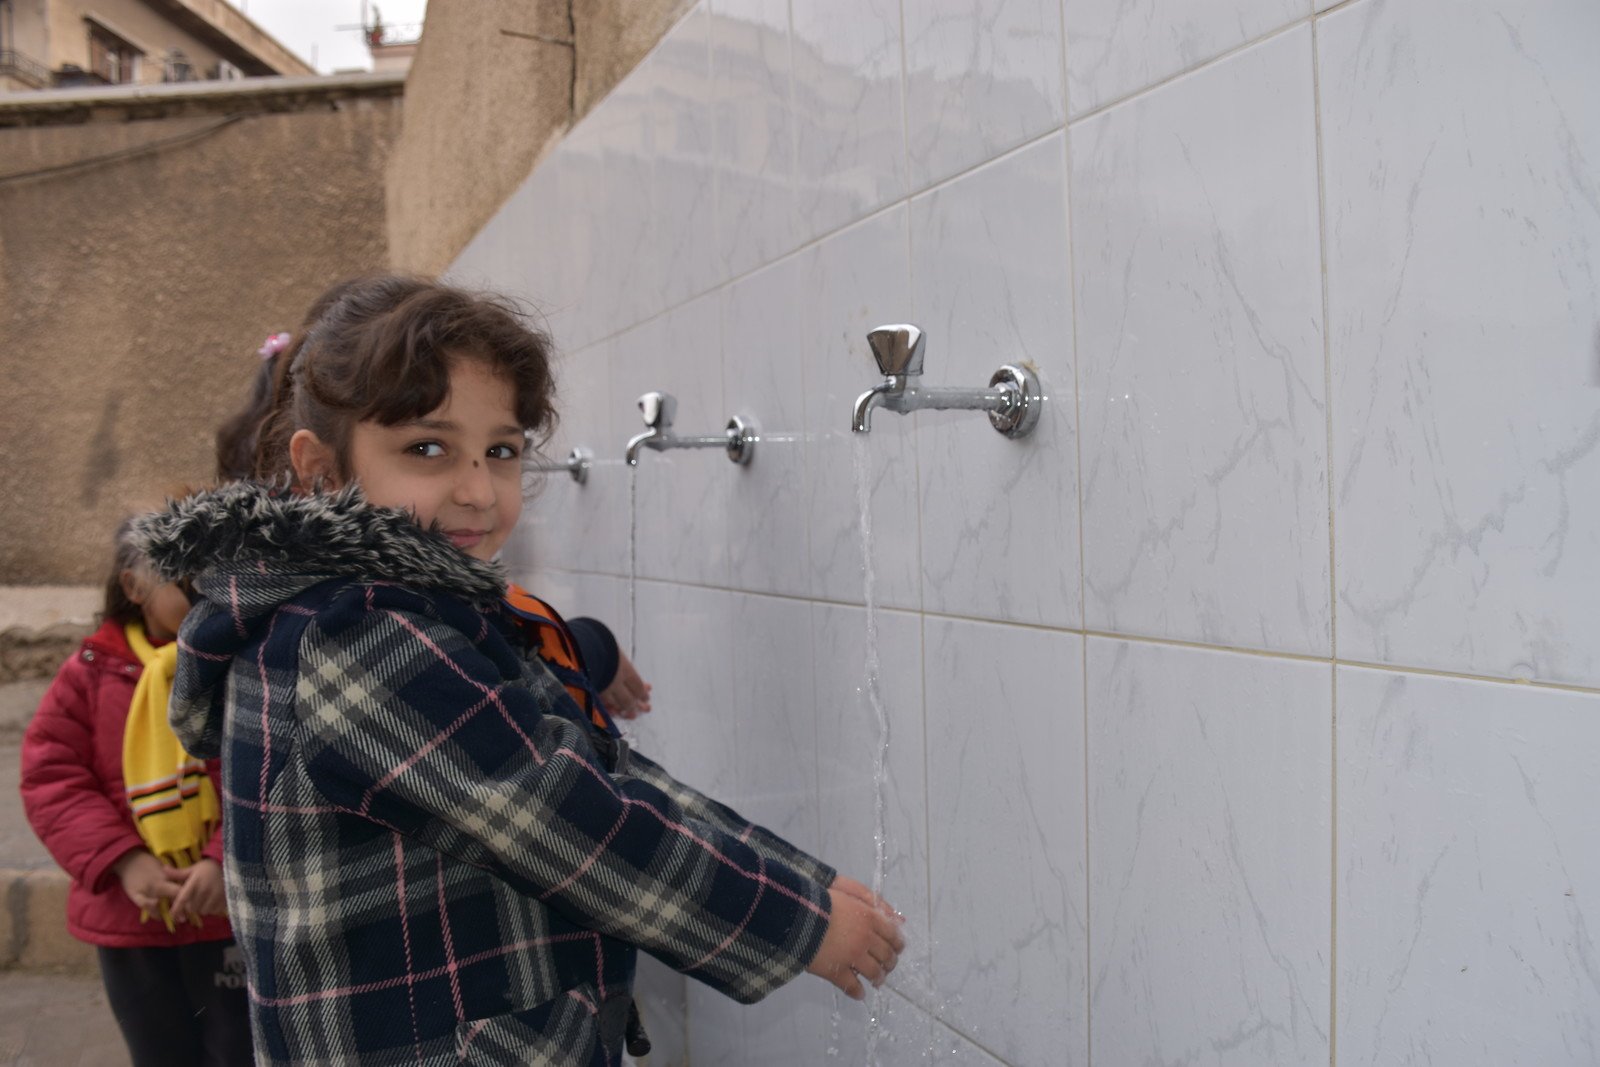 In 2018, Oxfam rehabilitated the water networks and toilets of 16 schools in Damascus, providing children with access to safe, clean water, and reducing public health risks associated with poor sanitation and water-borne diseases. “I always avoided using the toilets at school. They used to be smelly and always wet, but not anymore,’’ Noura, 7, tells Oxfam. (Photo: Dania Kareh / Oxfam)